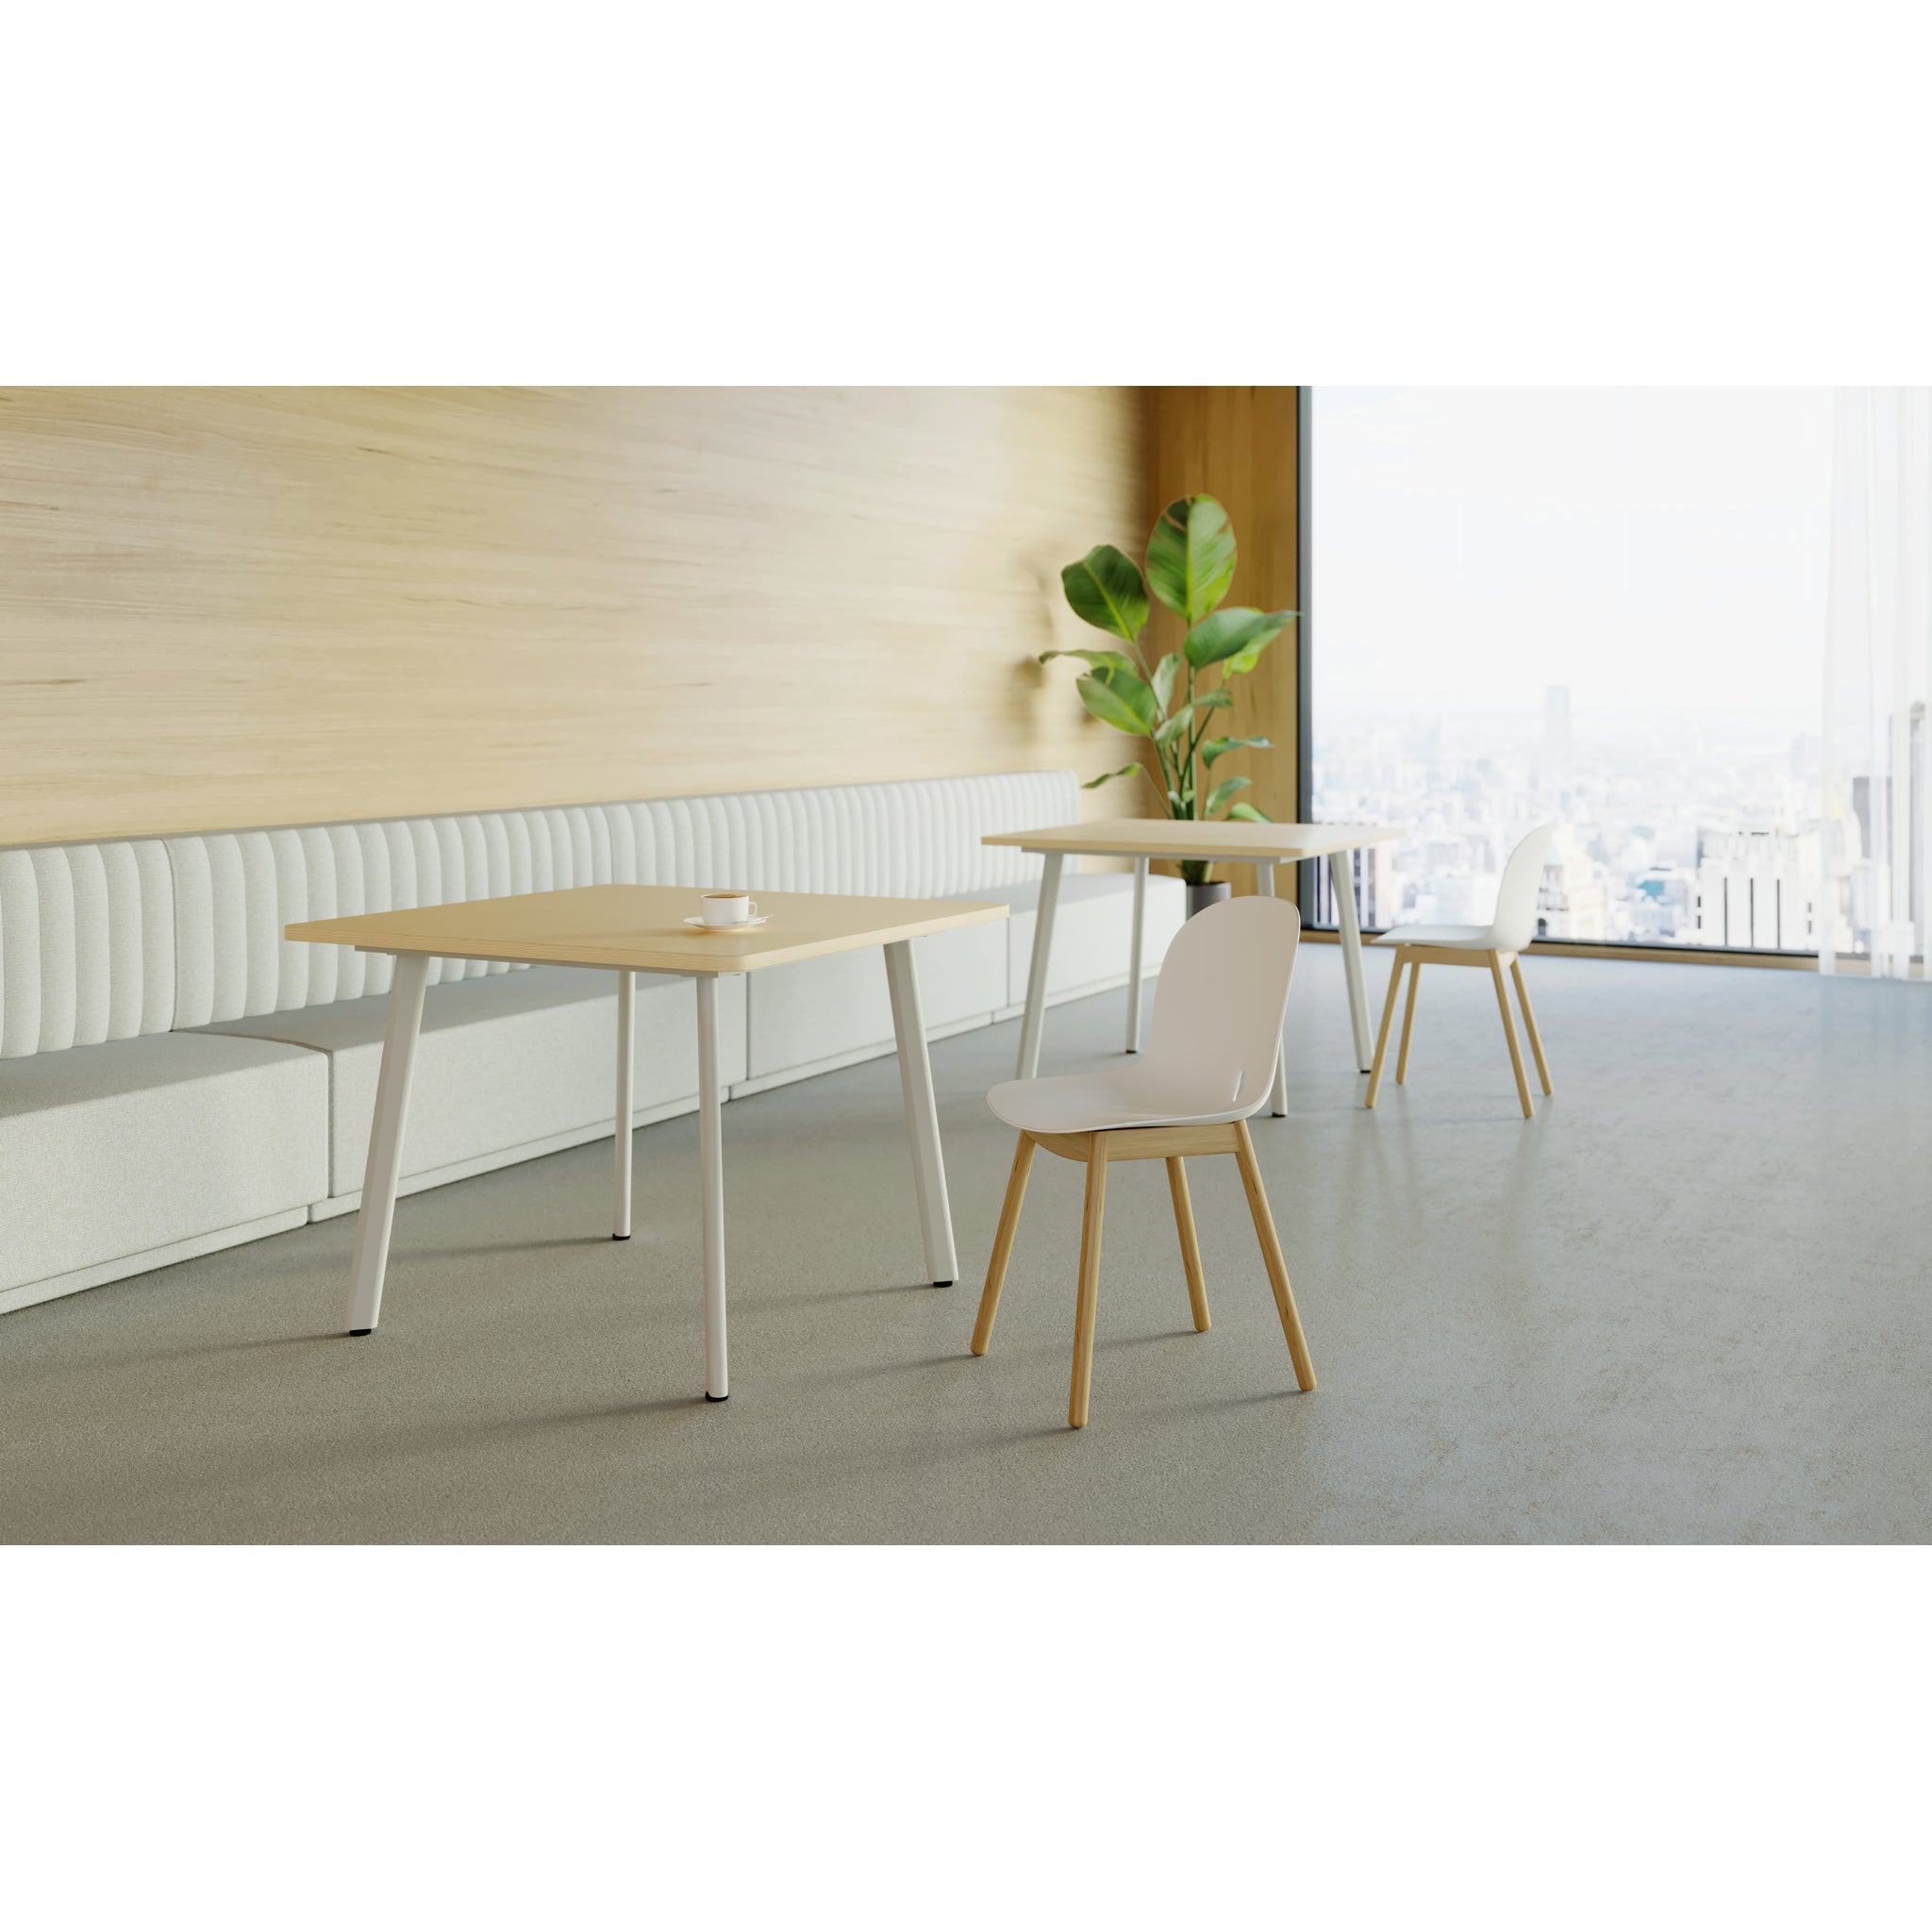 Sok - Square Dining Table